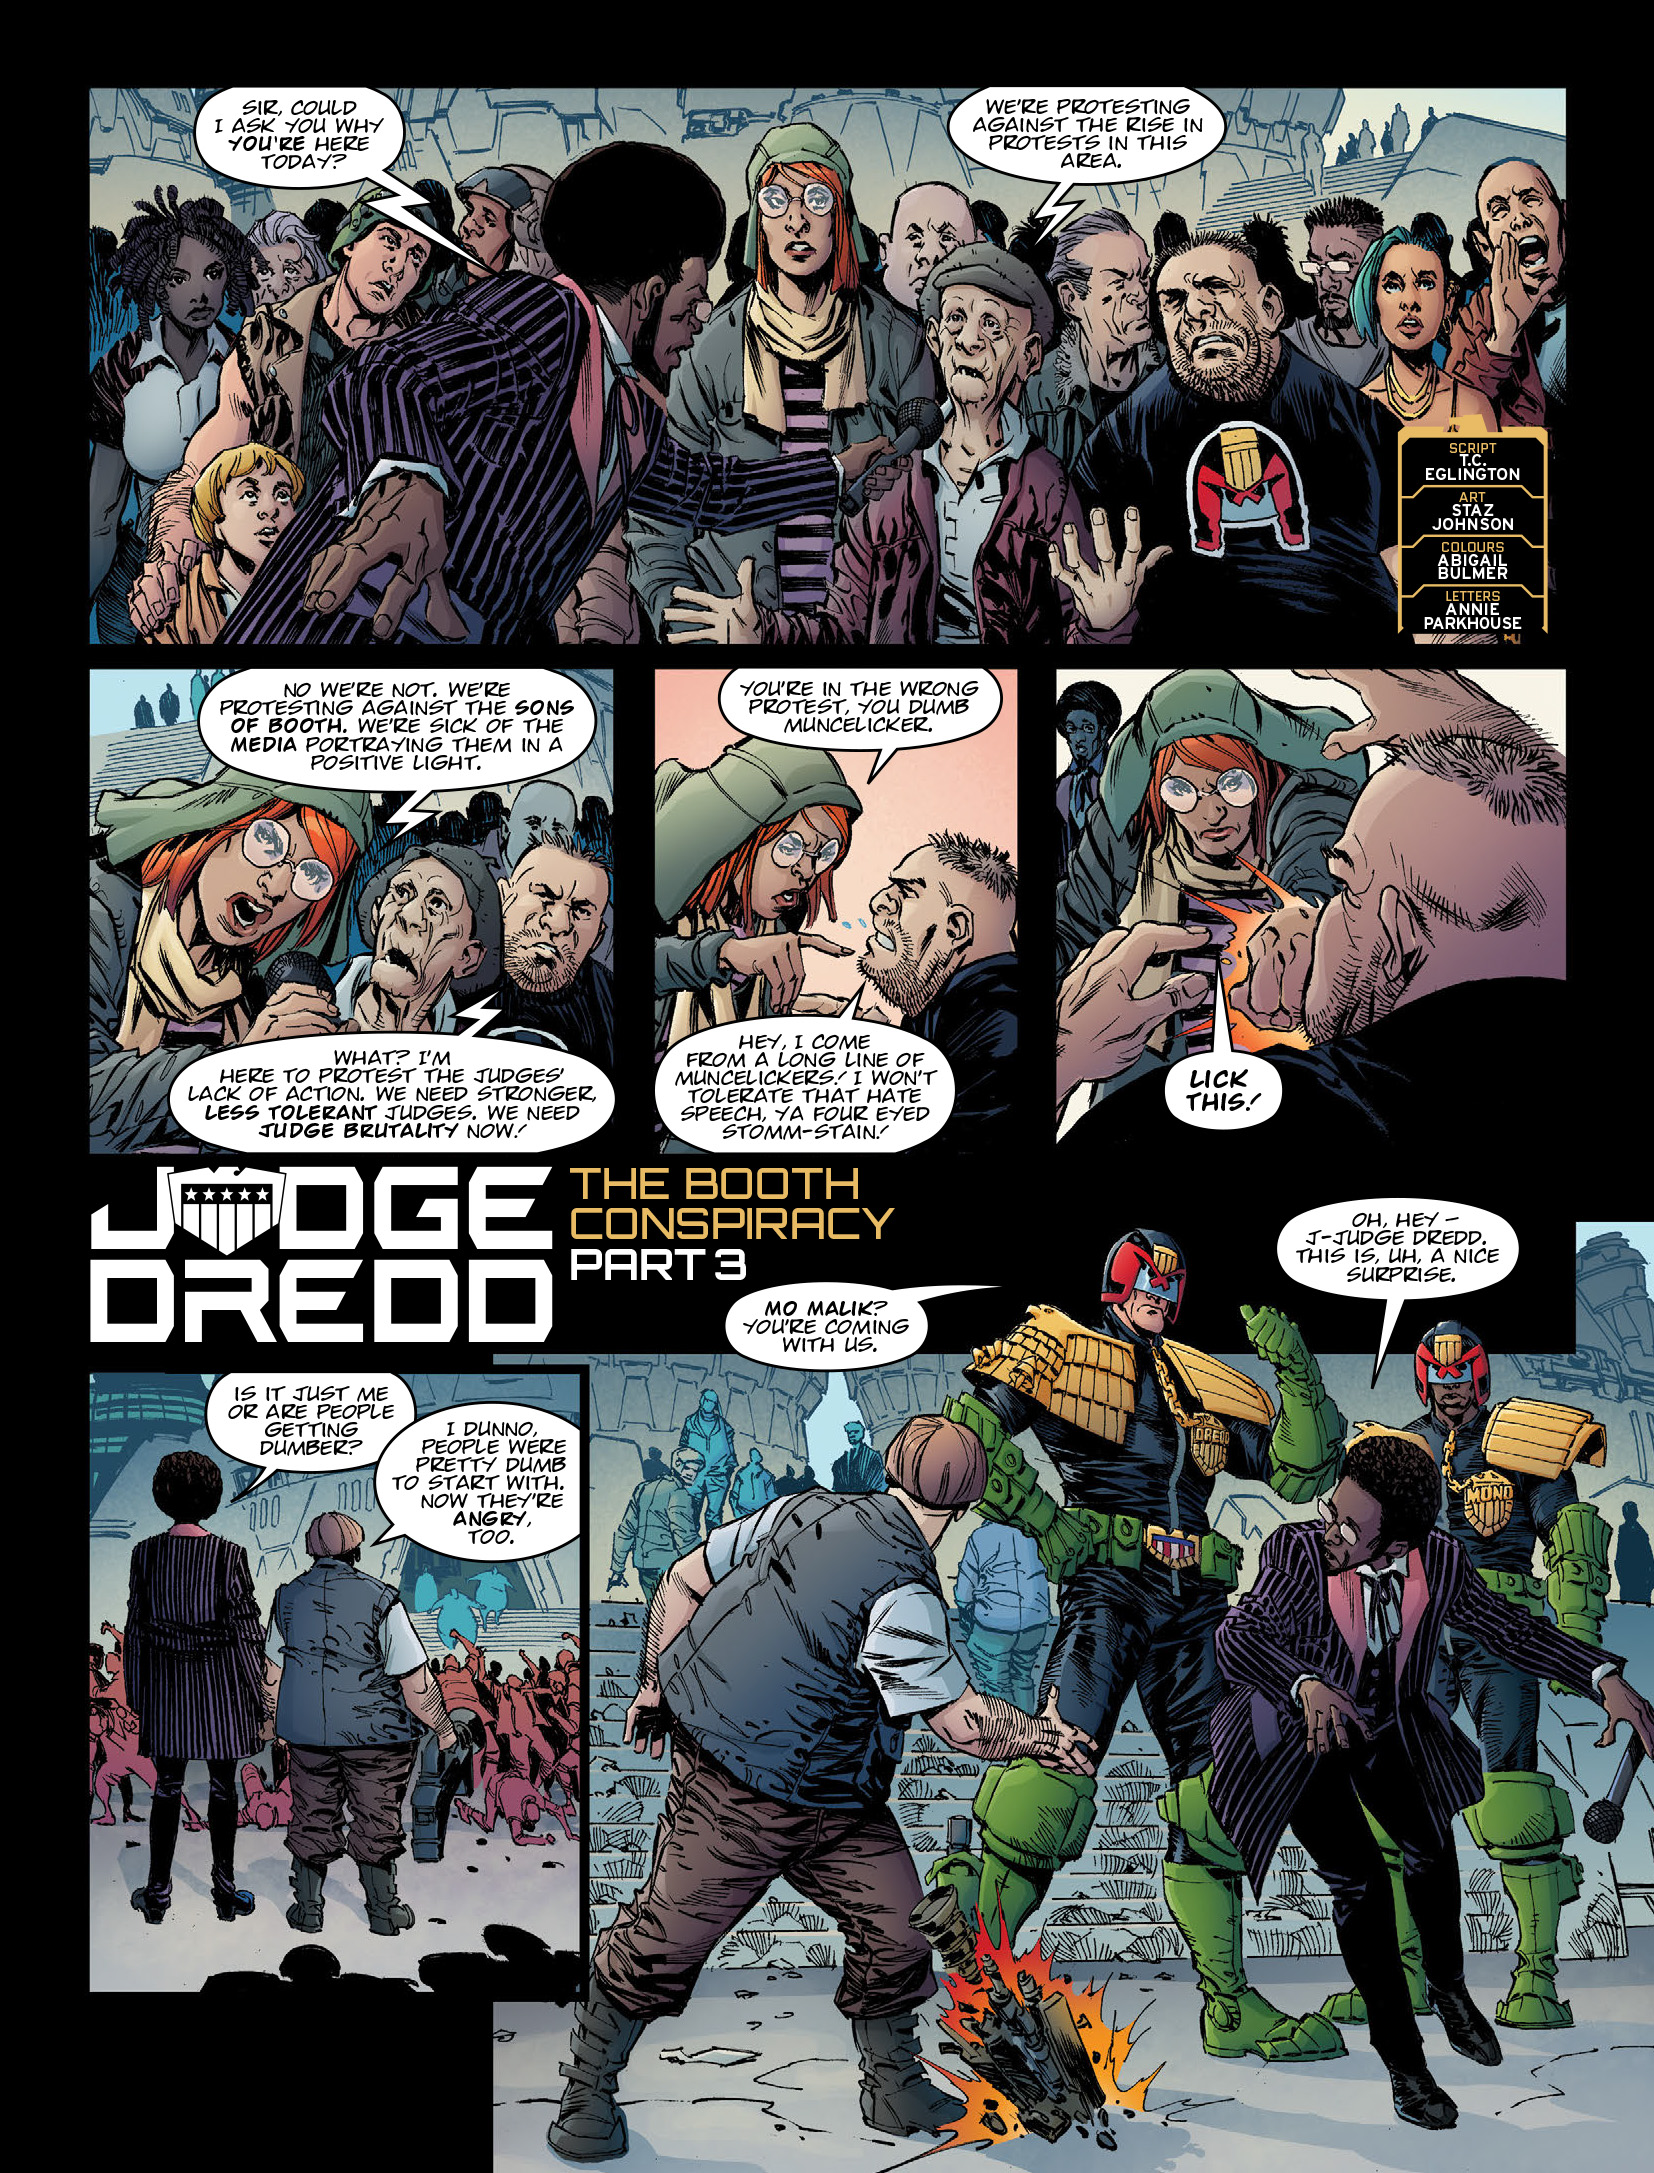 2000 AD: Chapter 2097 - Page 3